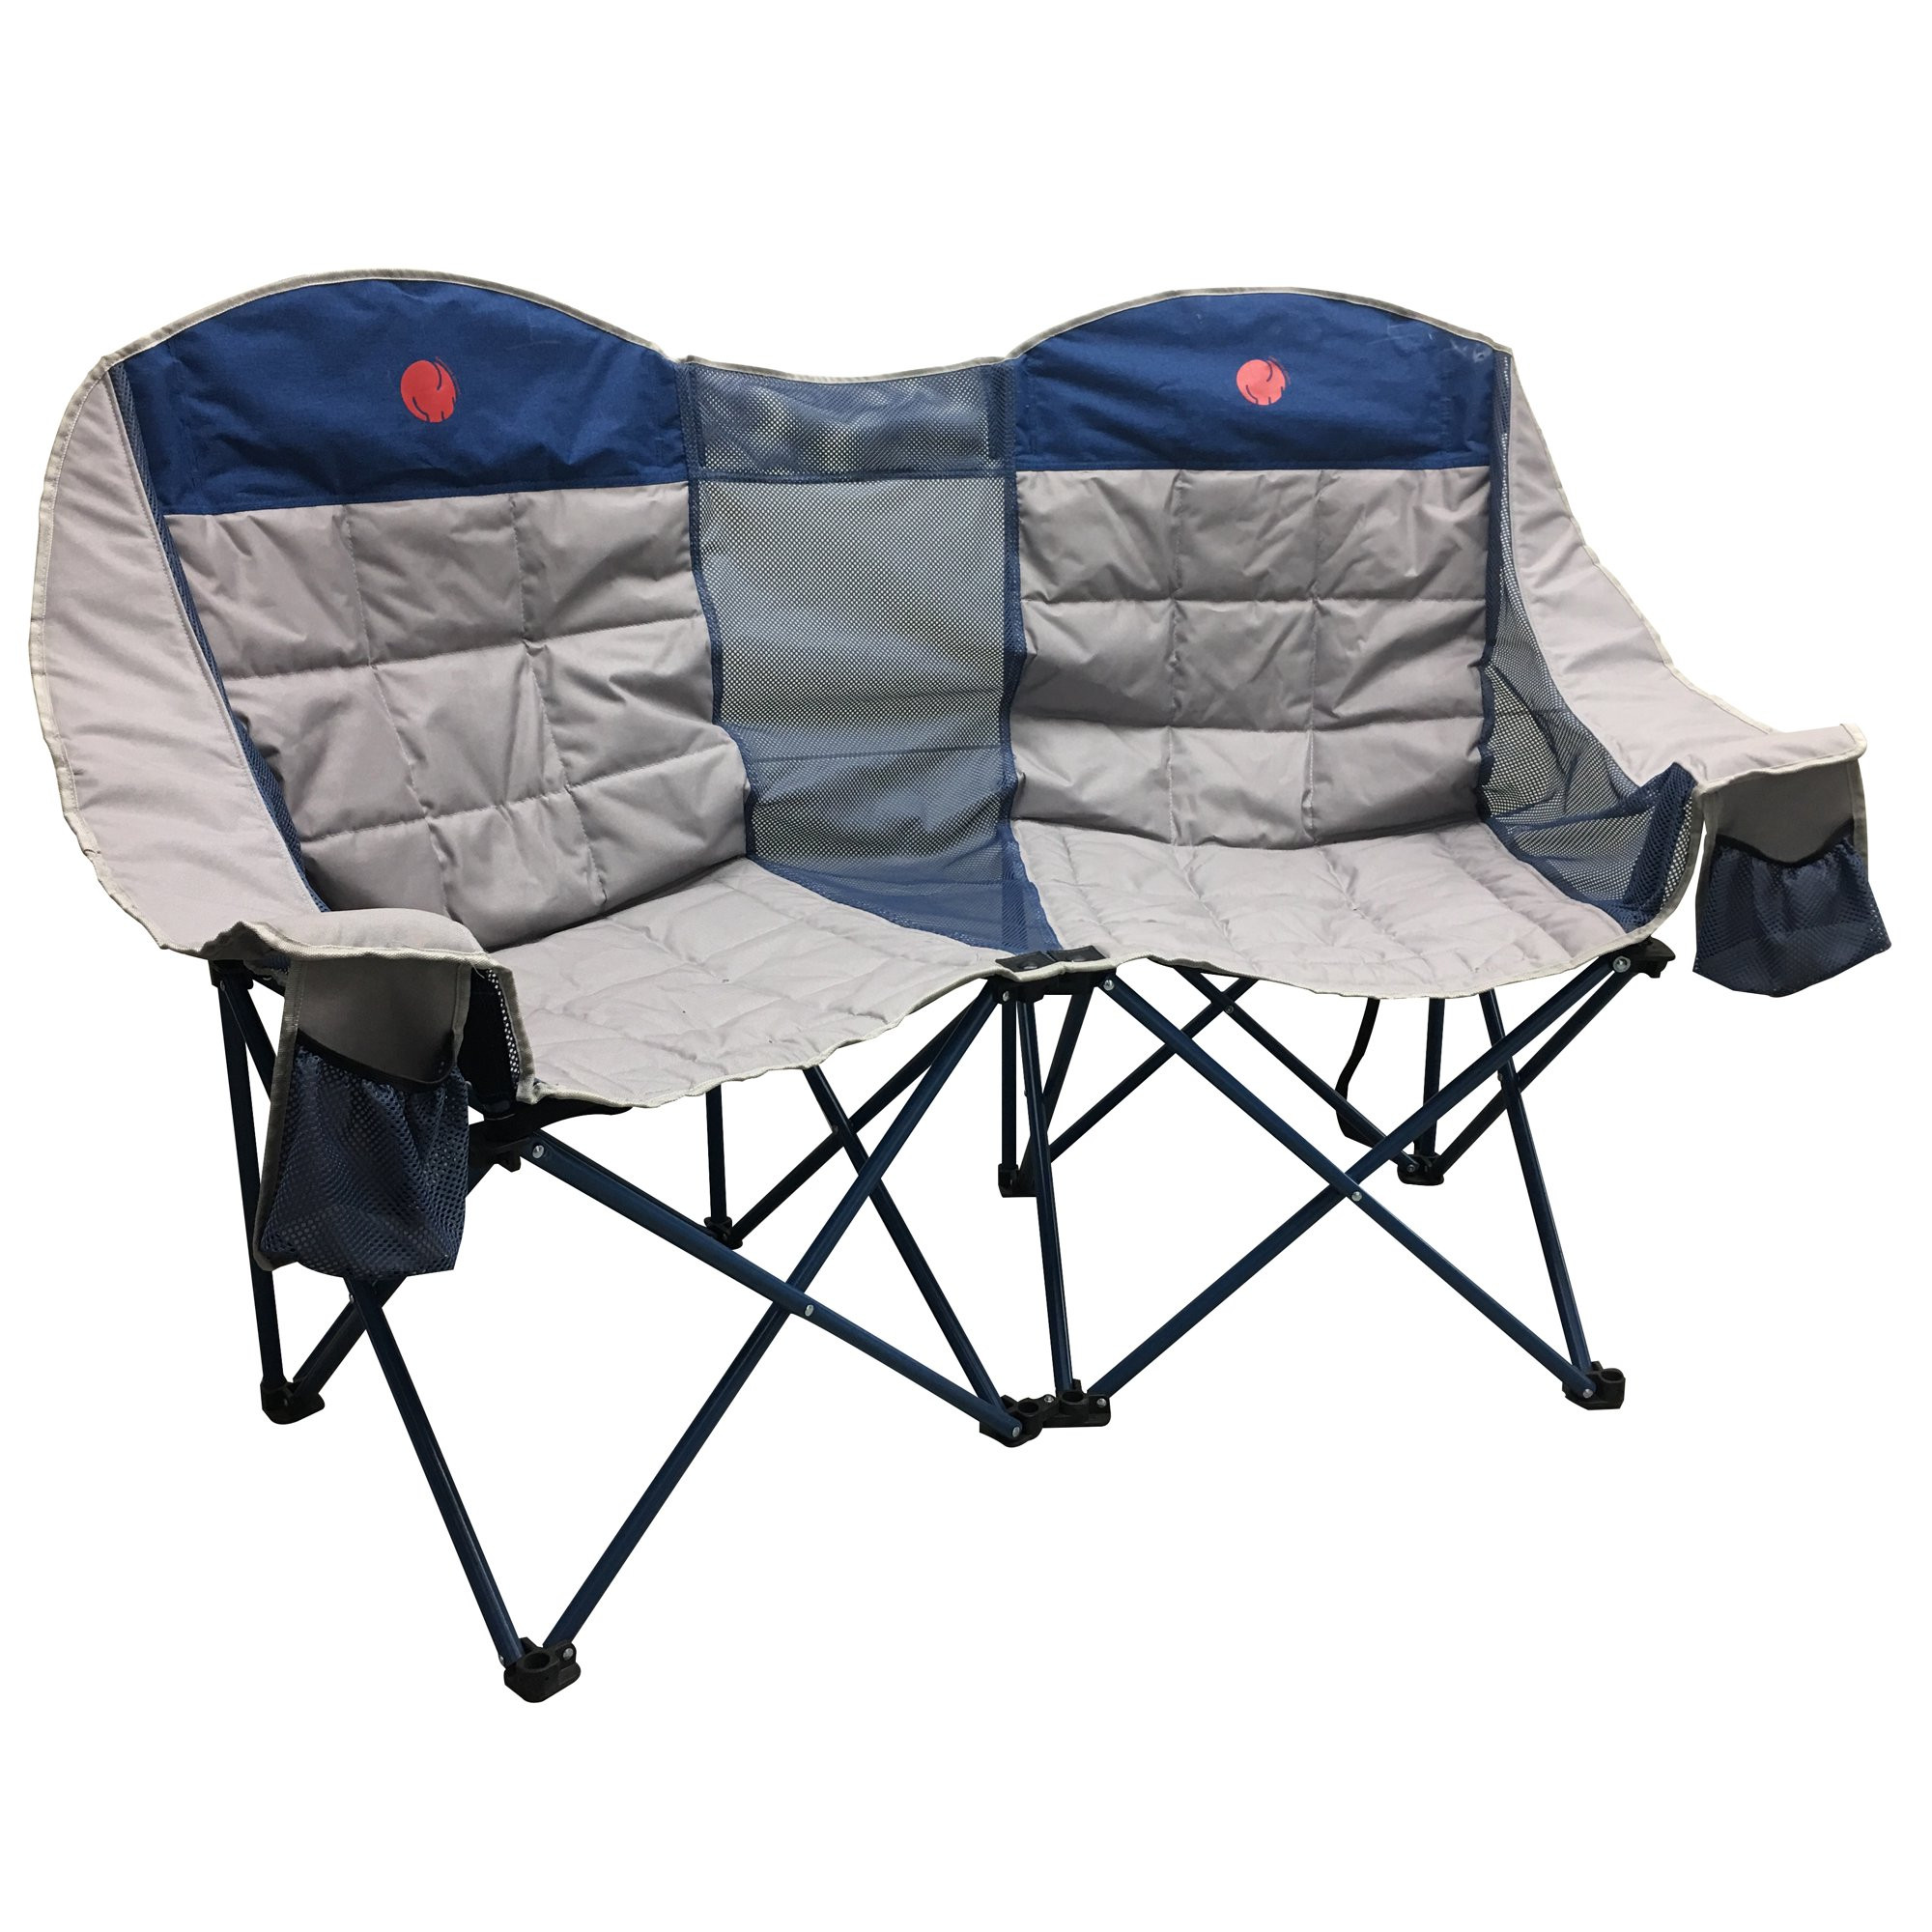 OmniCore Designs Moon Phase Oversized Heavy Duty Quad Double Camp Chair Loveseat